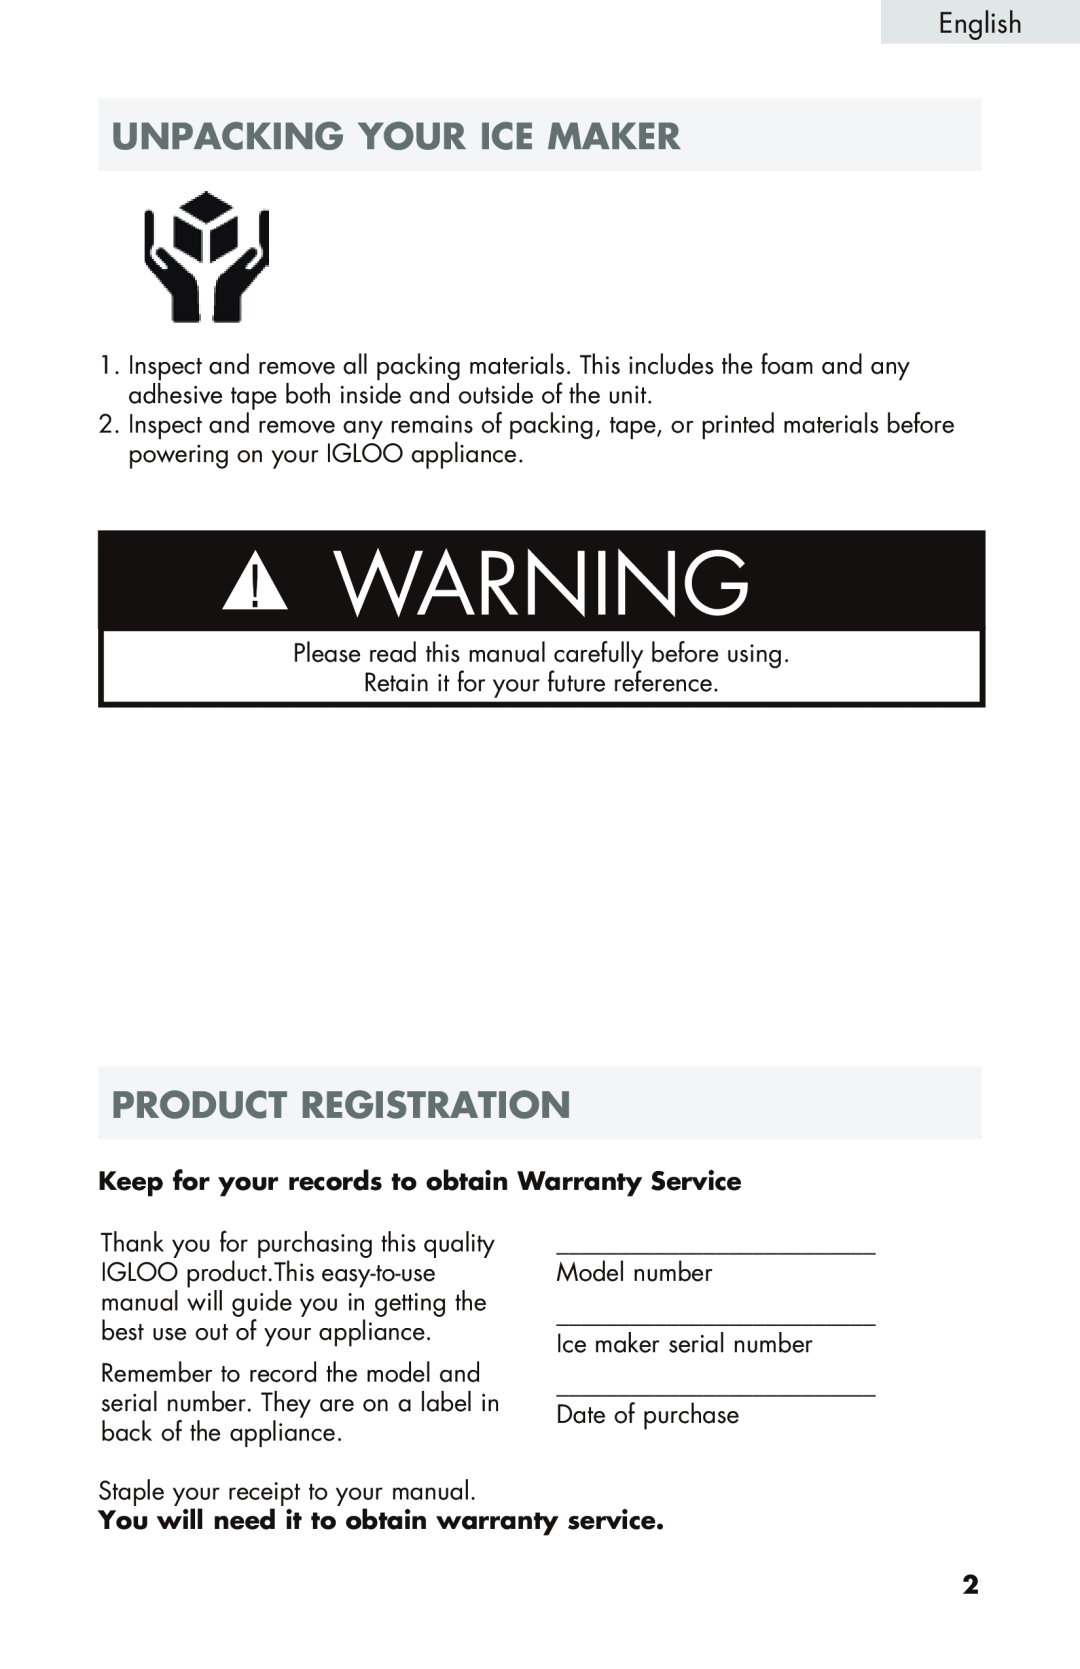 Igloo ICE102-WHITE Unpacking Your Ice Maker, Product Registration, English, You will need it to obtain warranty service 